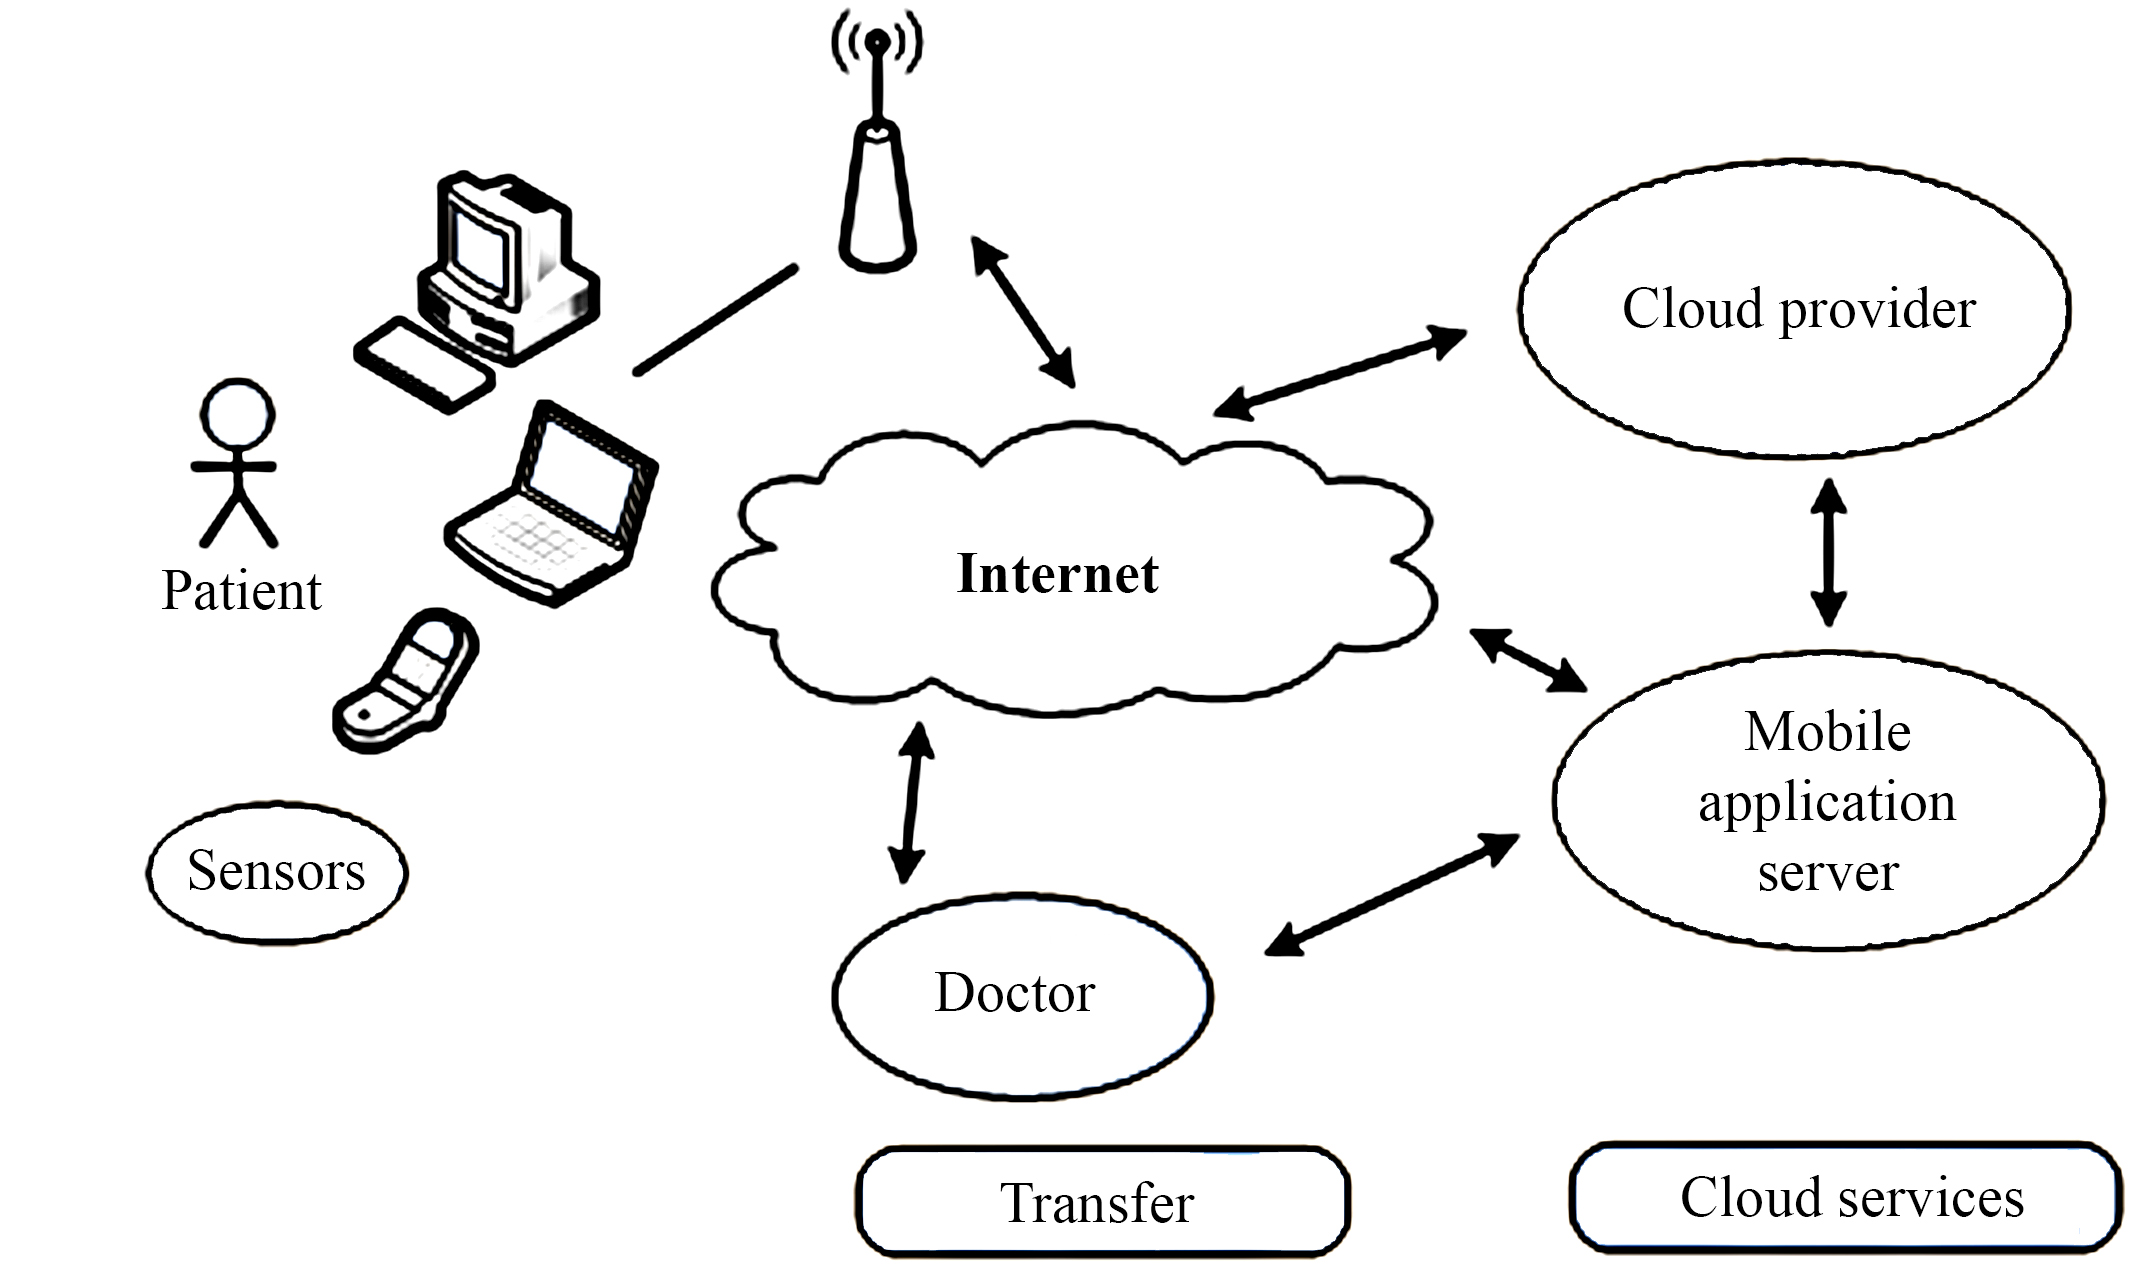 Generalized information with examples on the possibility of using a service-oriented approach and artificial intelligence technologies in the industry of e-Health